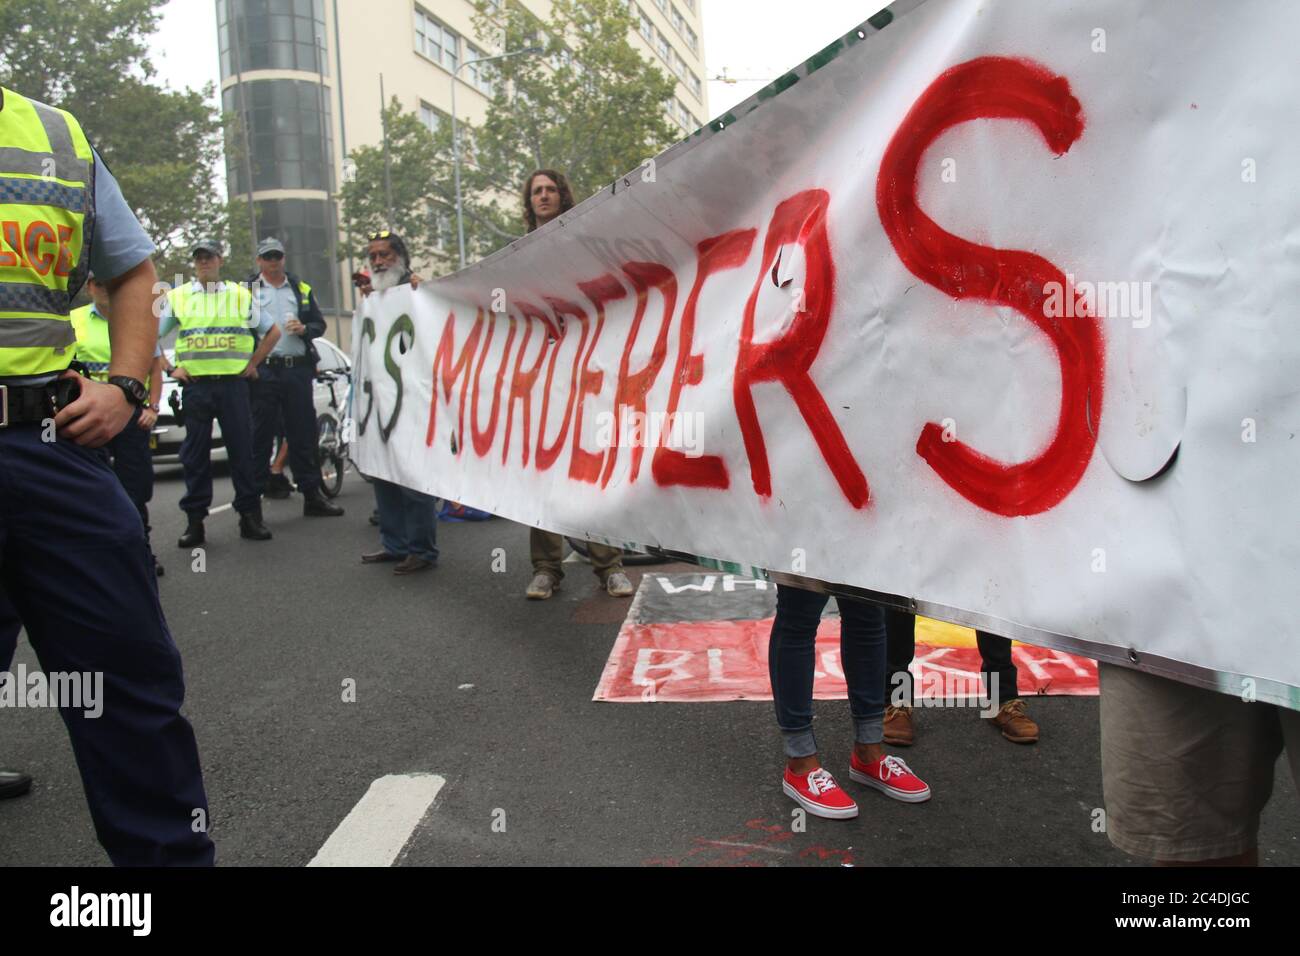 Some of the protesters blamed the police for TJ Hickey’s death. One sign accused them of being ‘murderers’. The police have said that they believe his Stock Photo